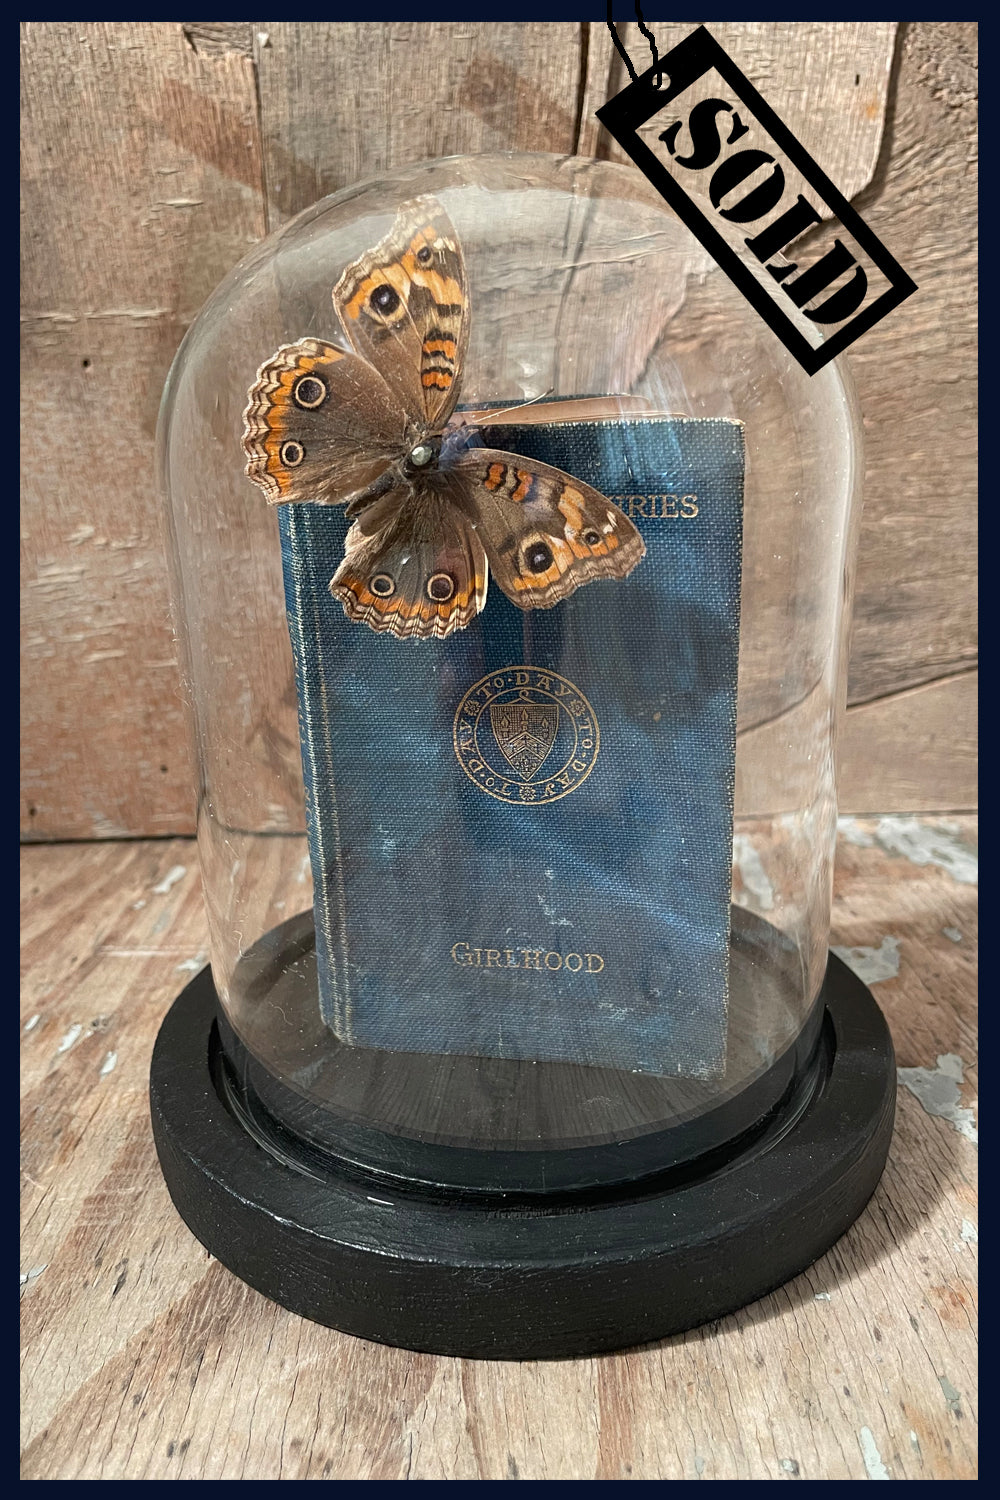 Enigma Variations Collection: Tiny 1907 Ruskin's 'Girlhood' Book with a Real Butterfly in a Display Dome